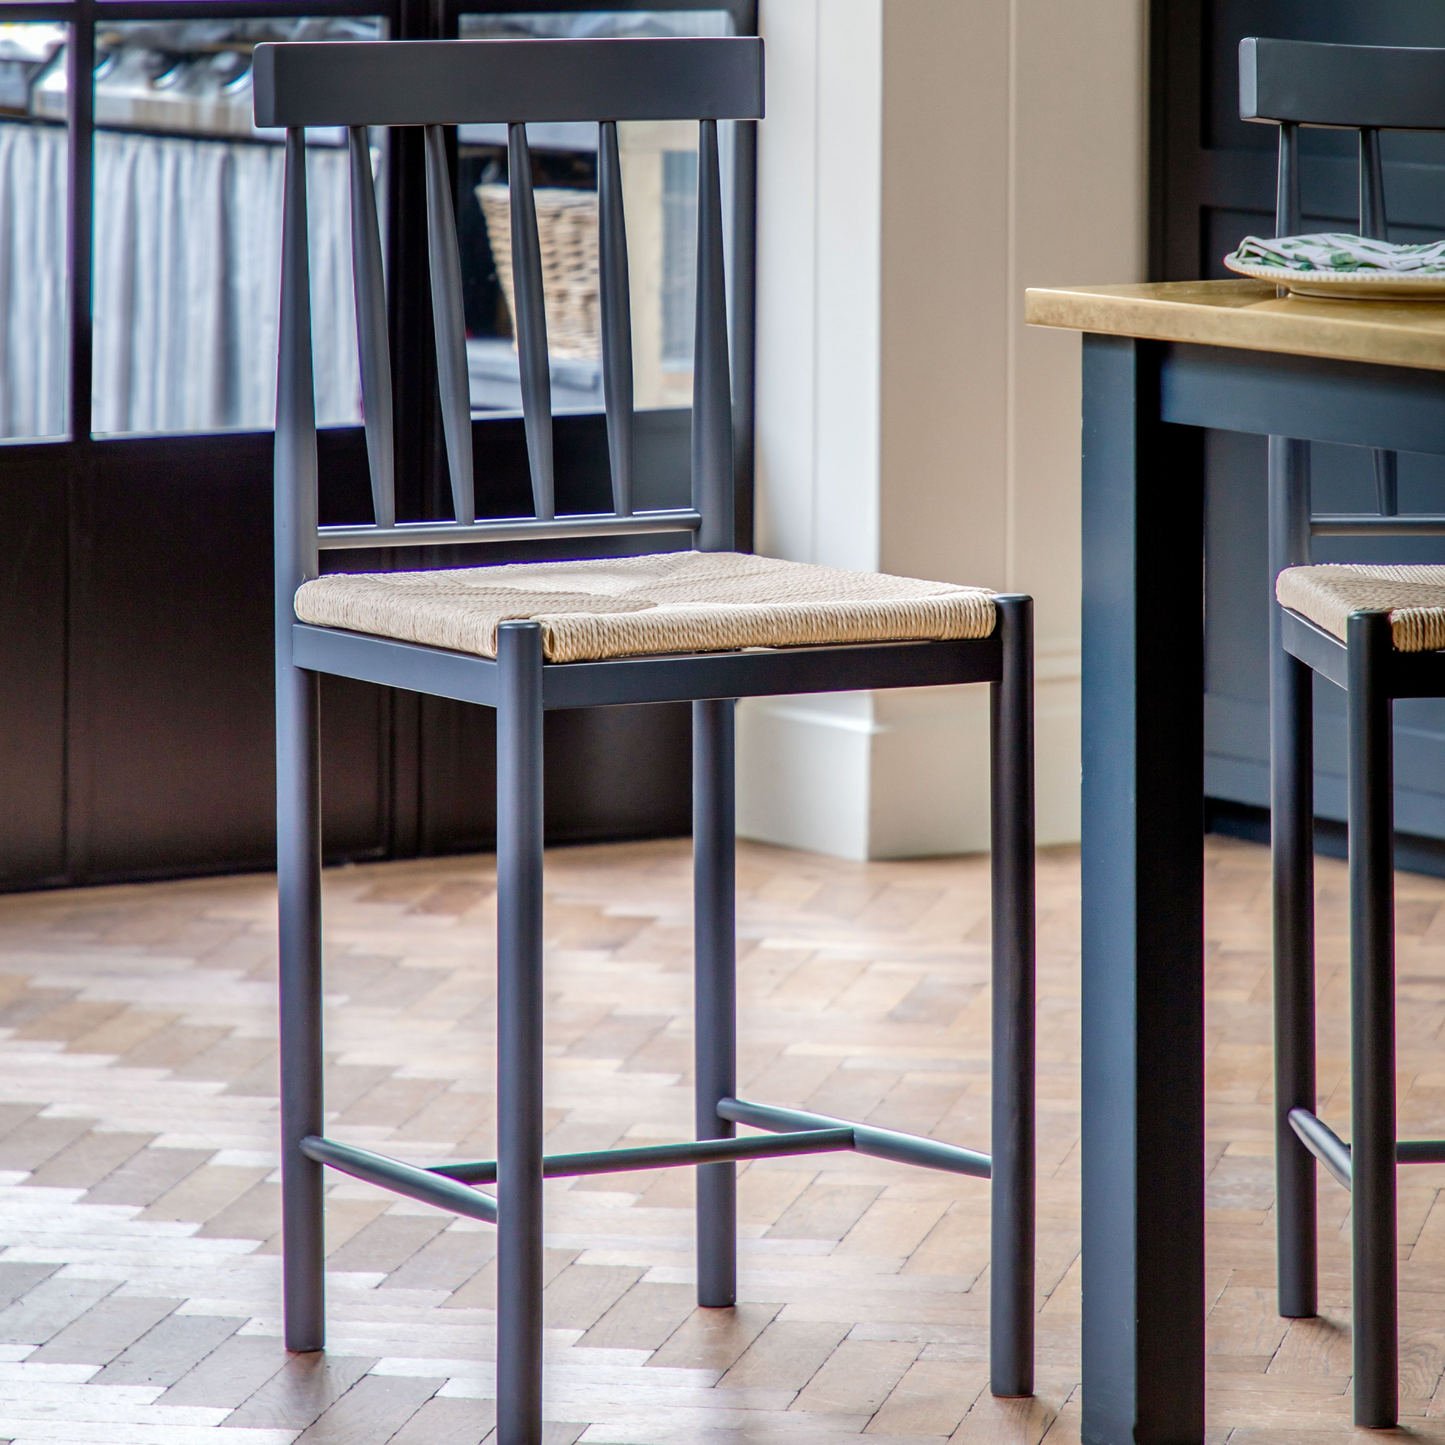 A Buckland Bar Stool in Meteor 2pk by Kikiathome.co.uk wooden table and chairs in a kitchen.